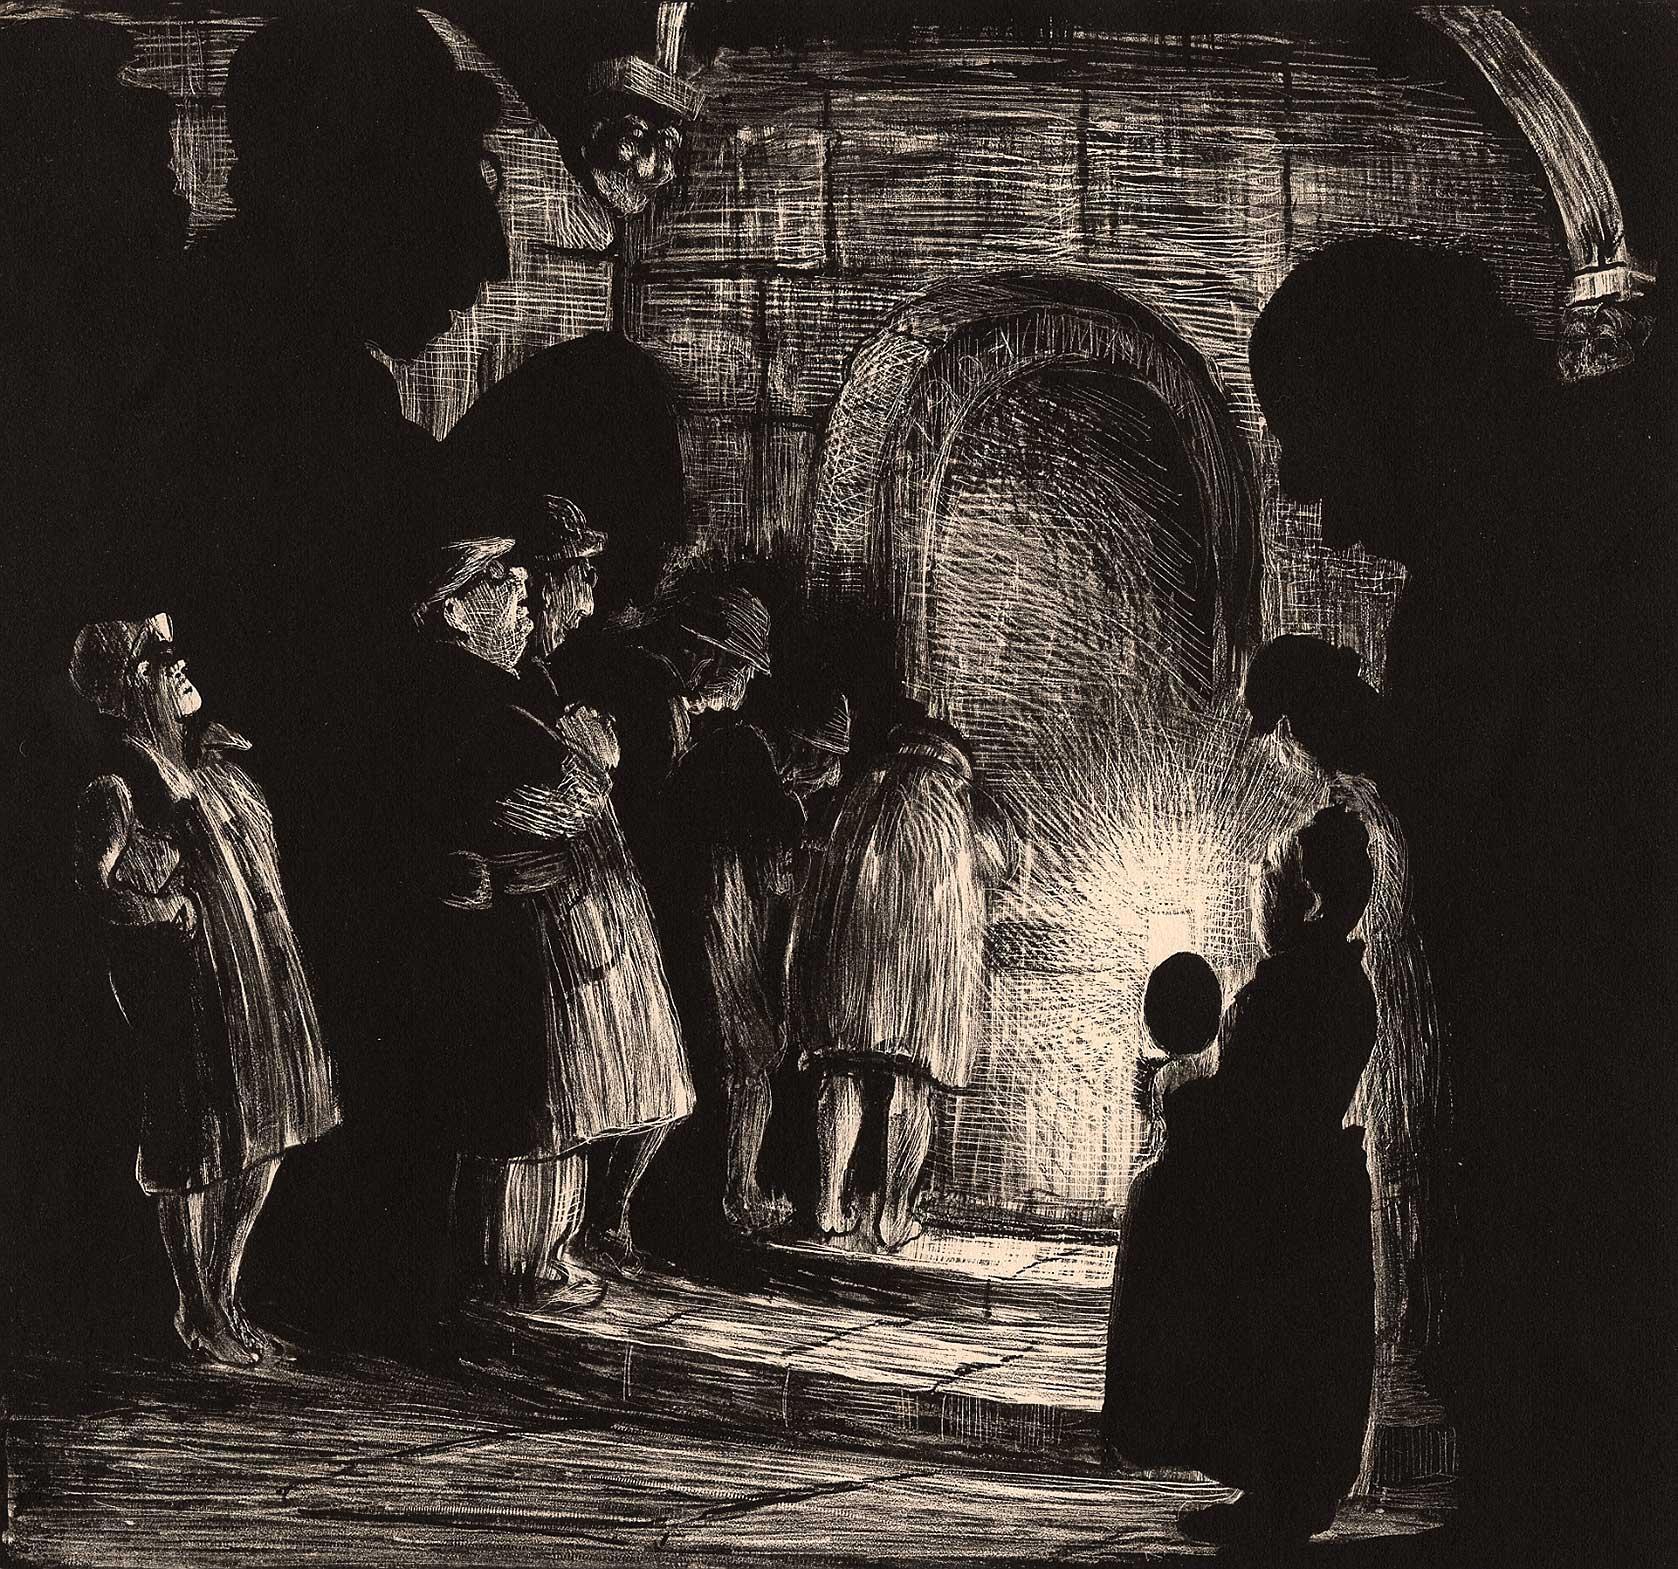 Mabel Dwight Figurative Print - Tourists in the Crypt at Chartres (an image of worshipers in shadows) 